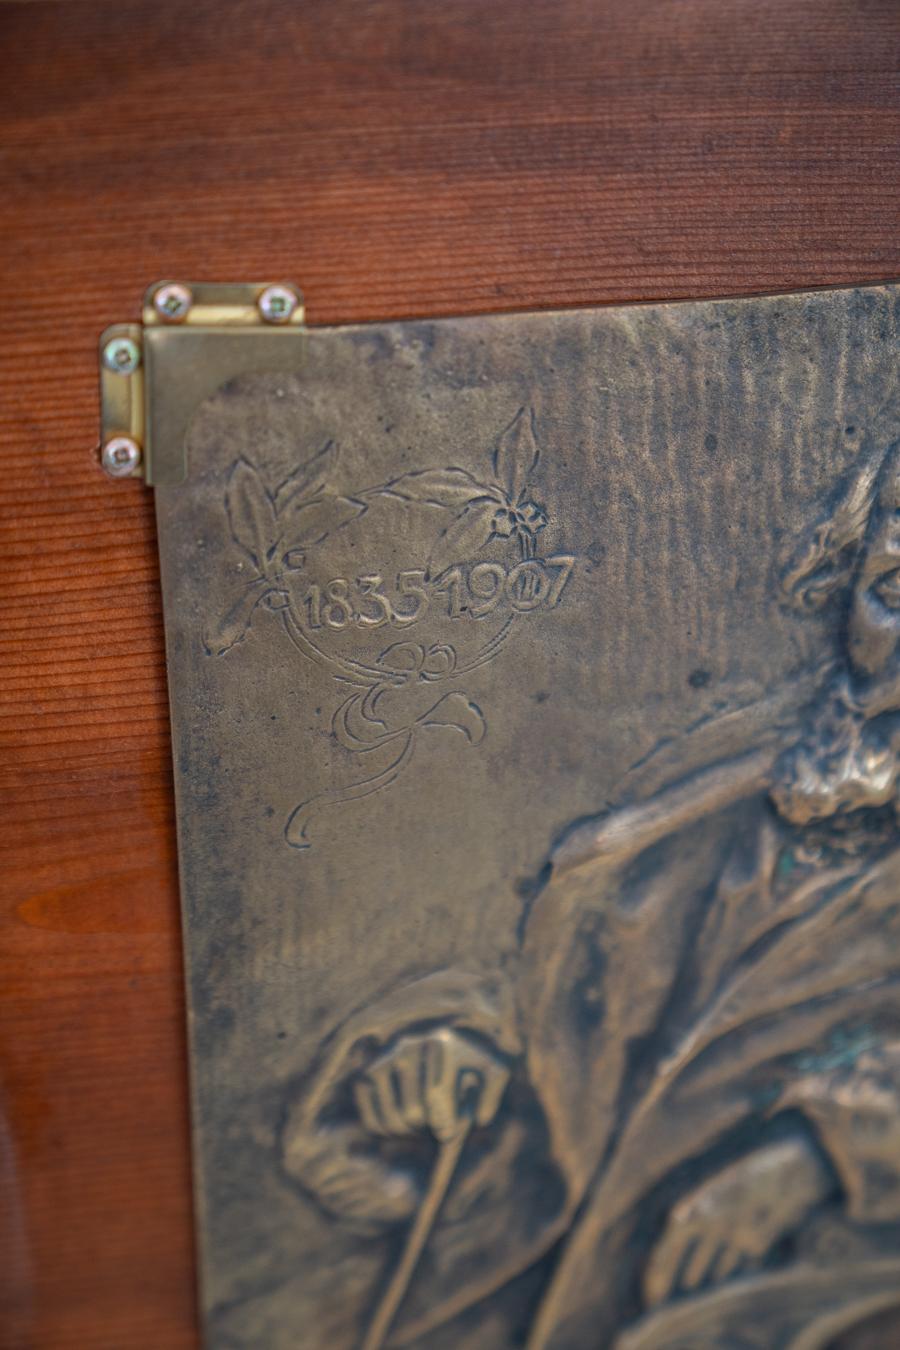 Bronze casting worked in bas-relief, depicting Joshua Carducci 1835
More information on the article
Artwork, including support.
MEASURES H34.5 x W34.5 x D4 / Kg5
Style
Vintage
Periodo del design
Before 1890s
Production Period
Before 1890s
Year